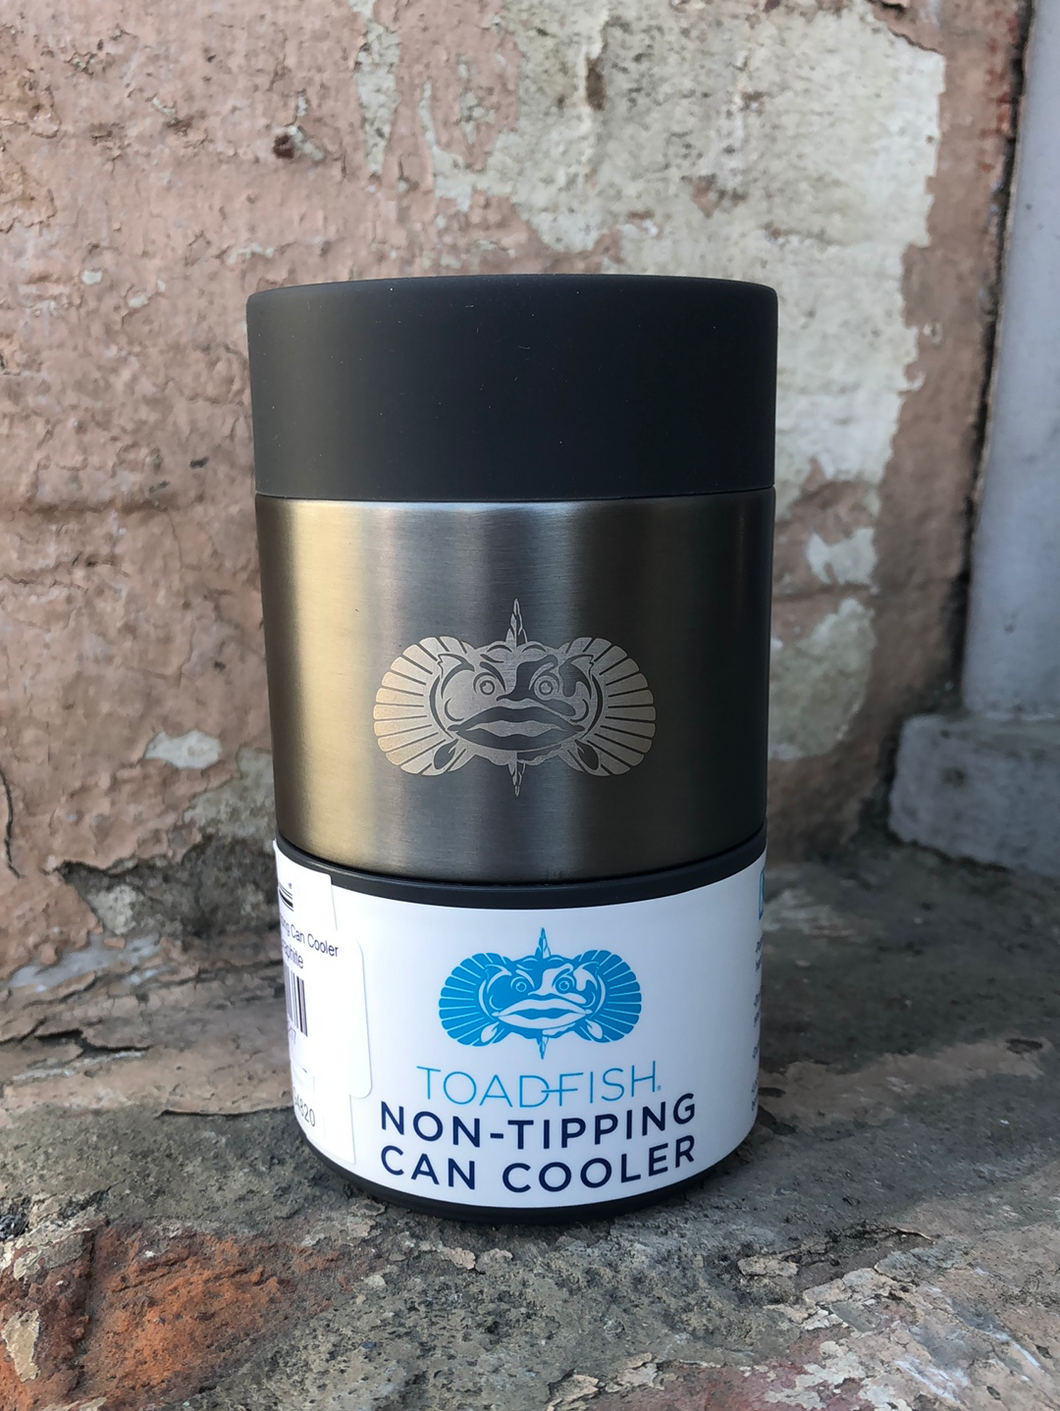 Toadfish Non-Tipping Can Cooler